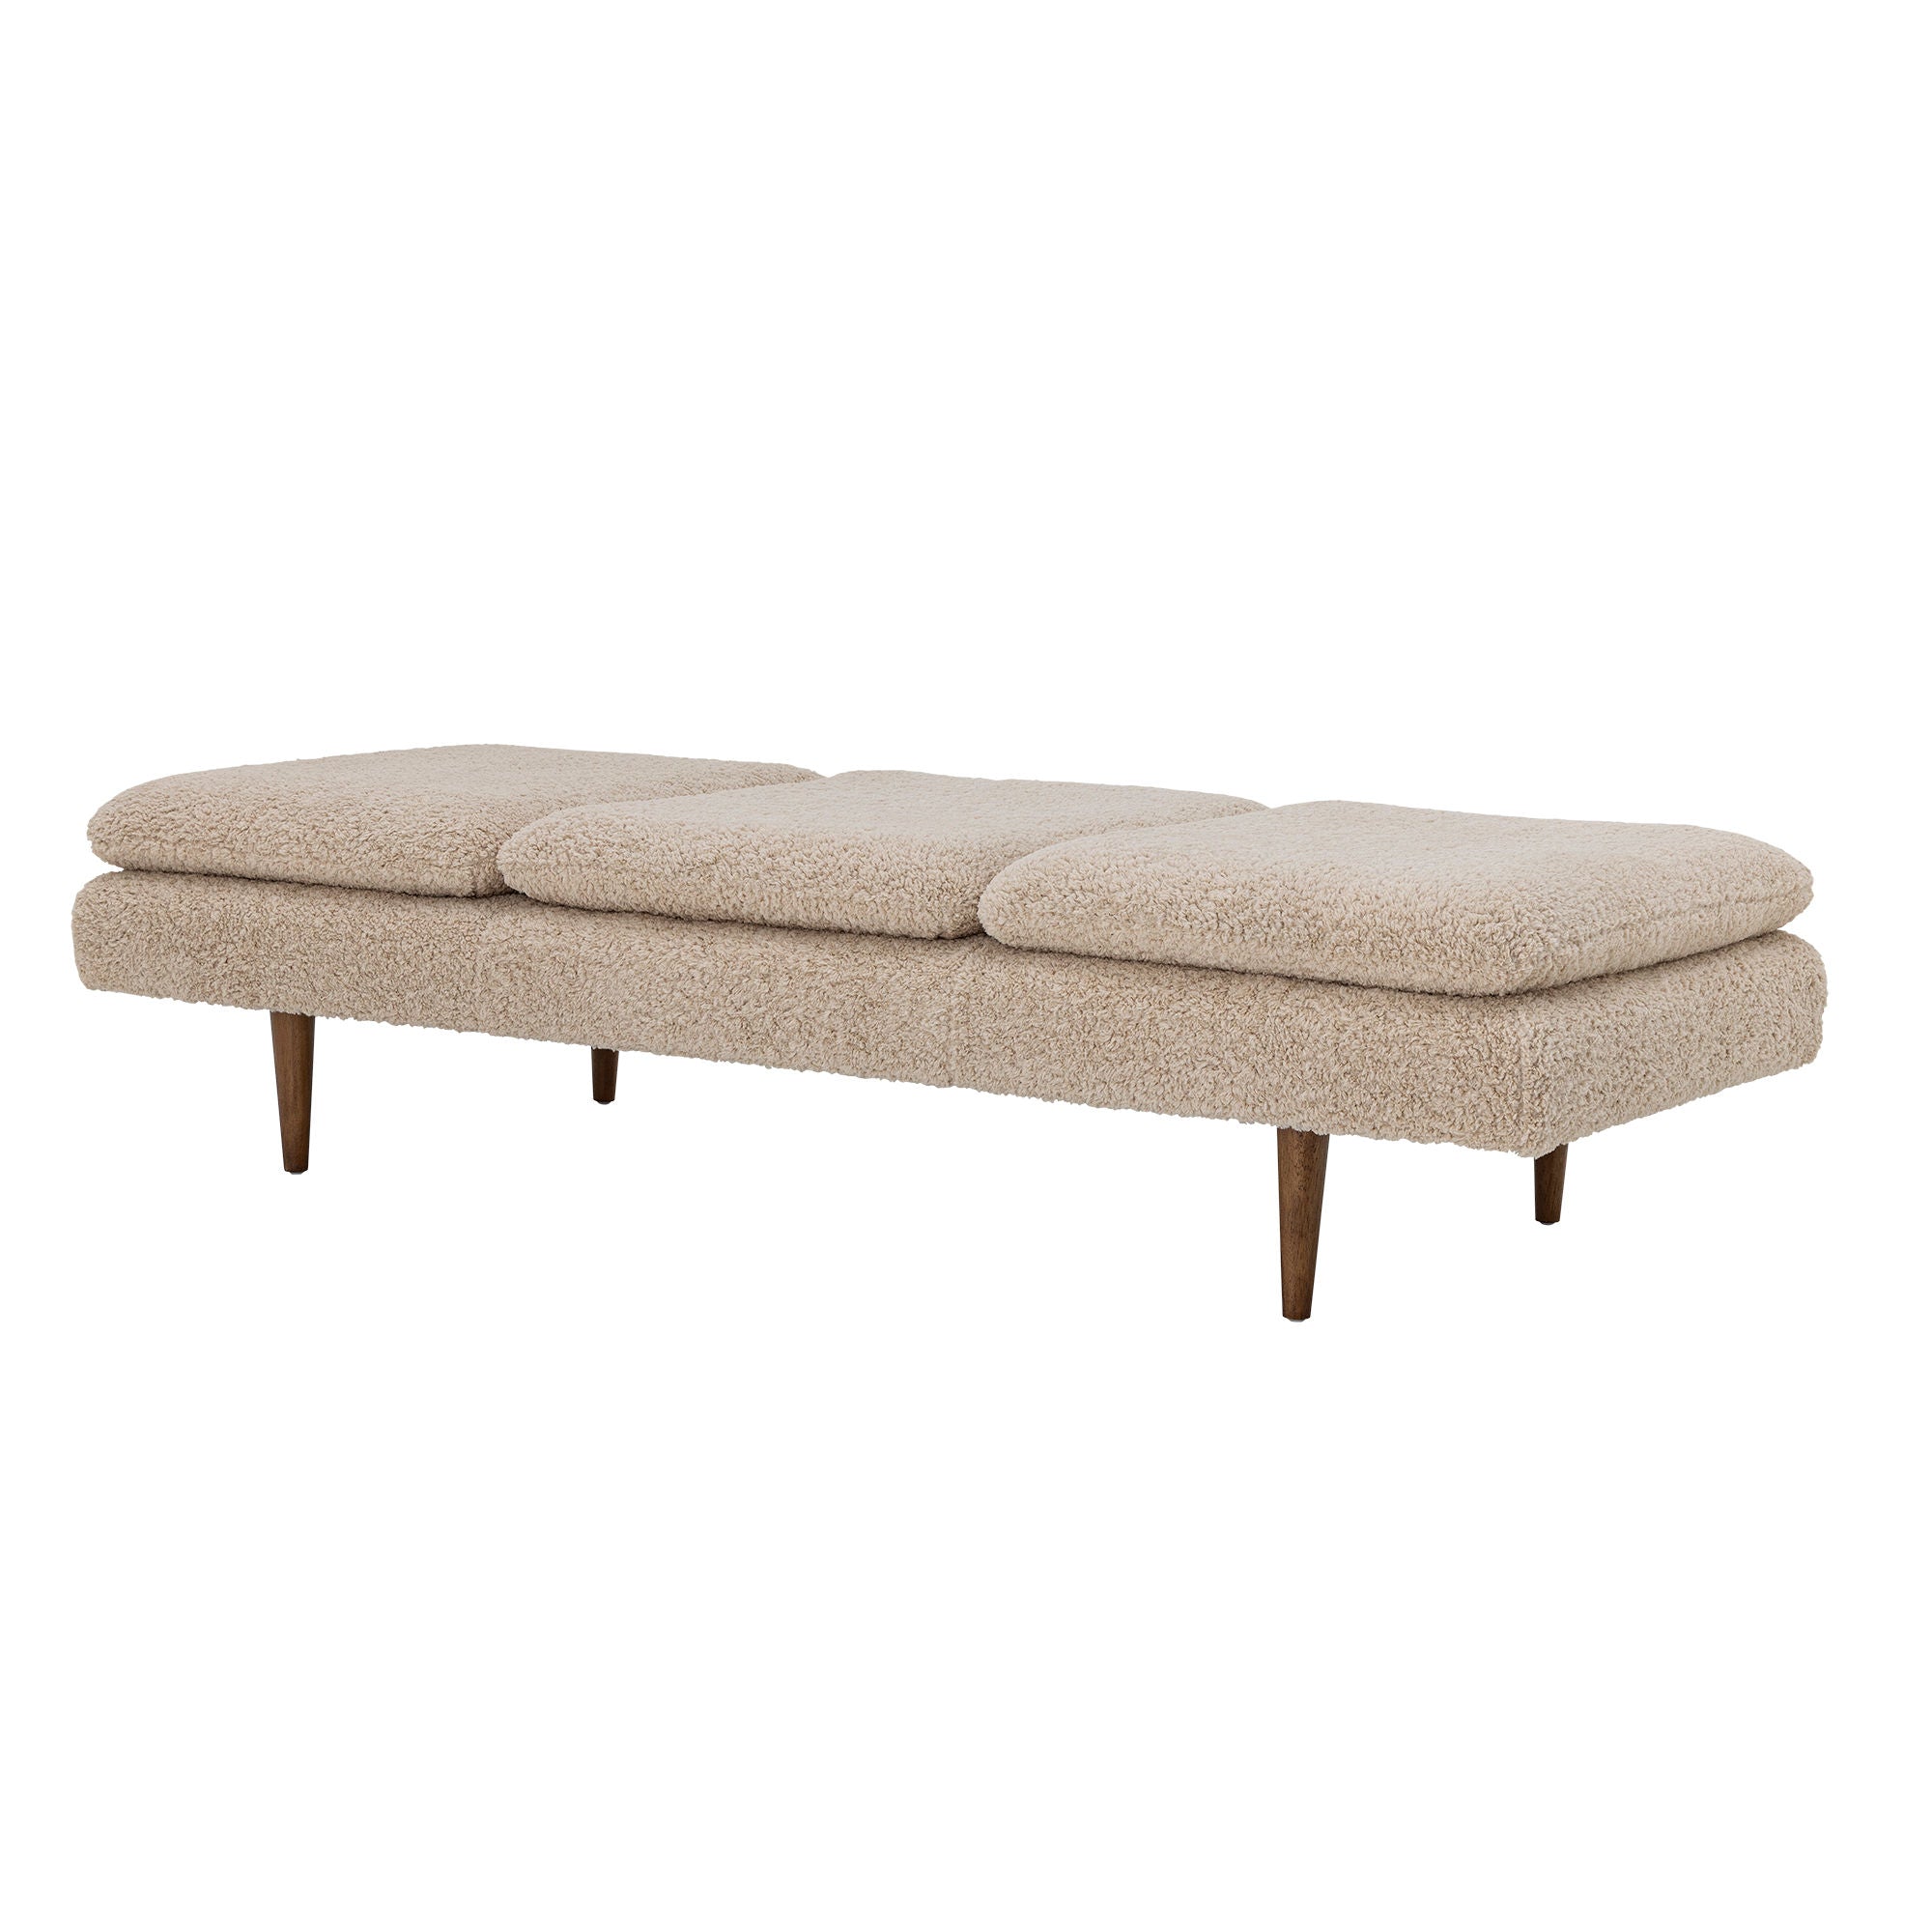 Bloomingville Pione Daybed, Nature, Polyester